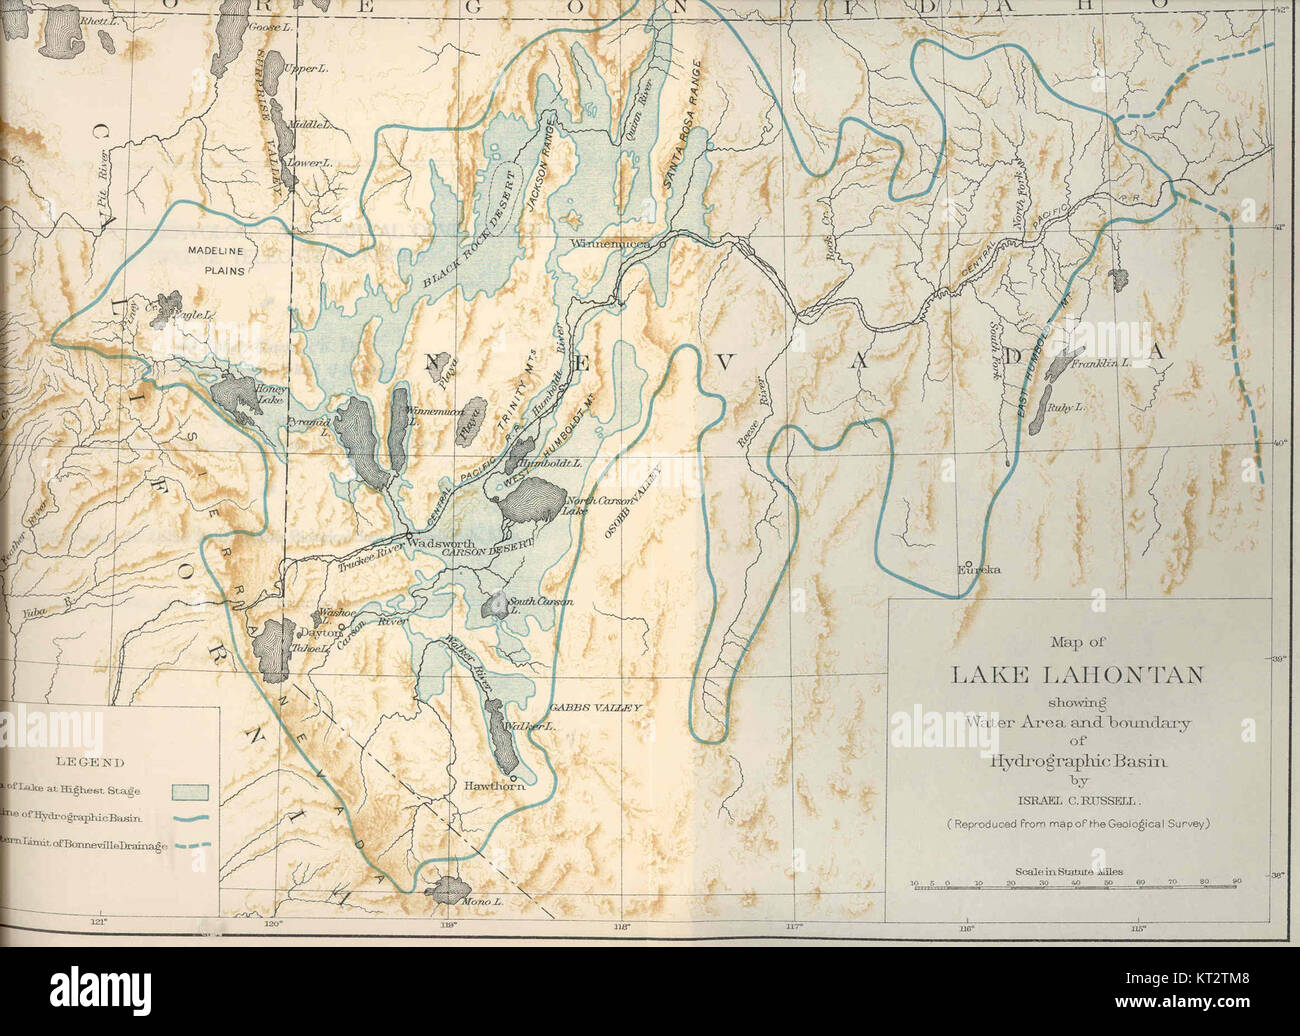 38976 Map of Lake Lahontan, showing water area and boundary of